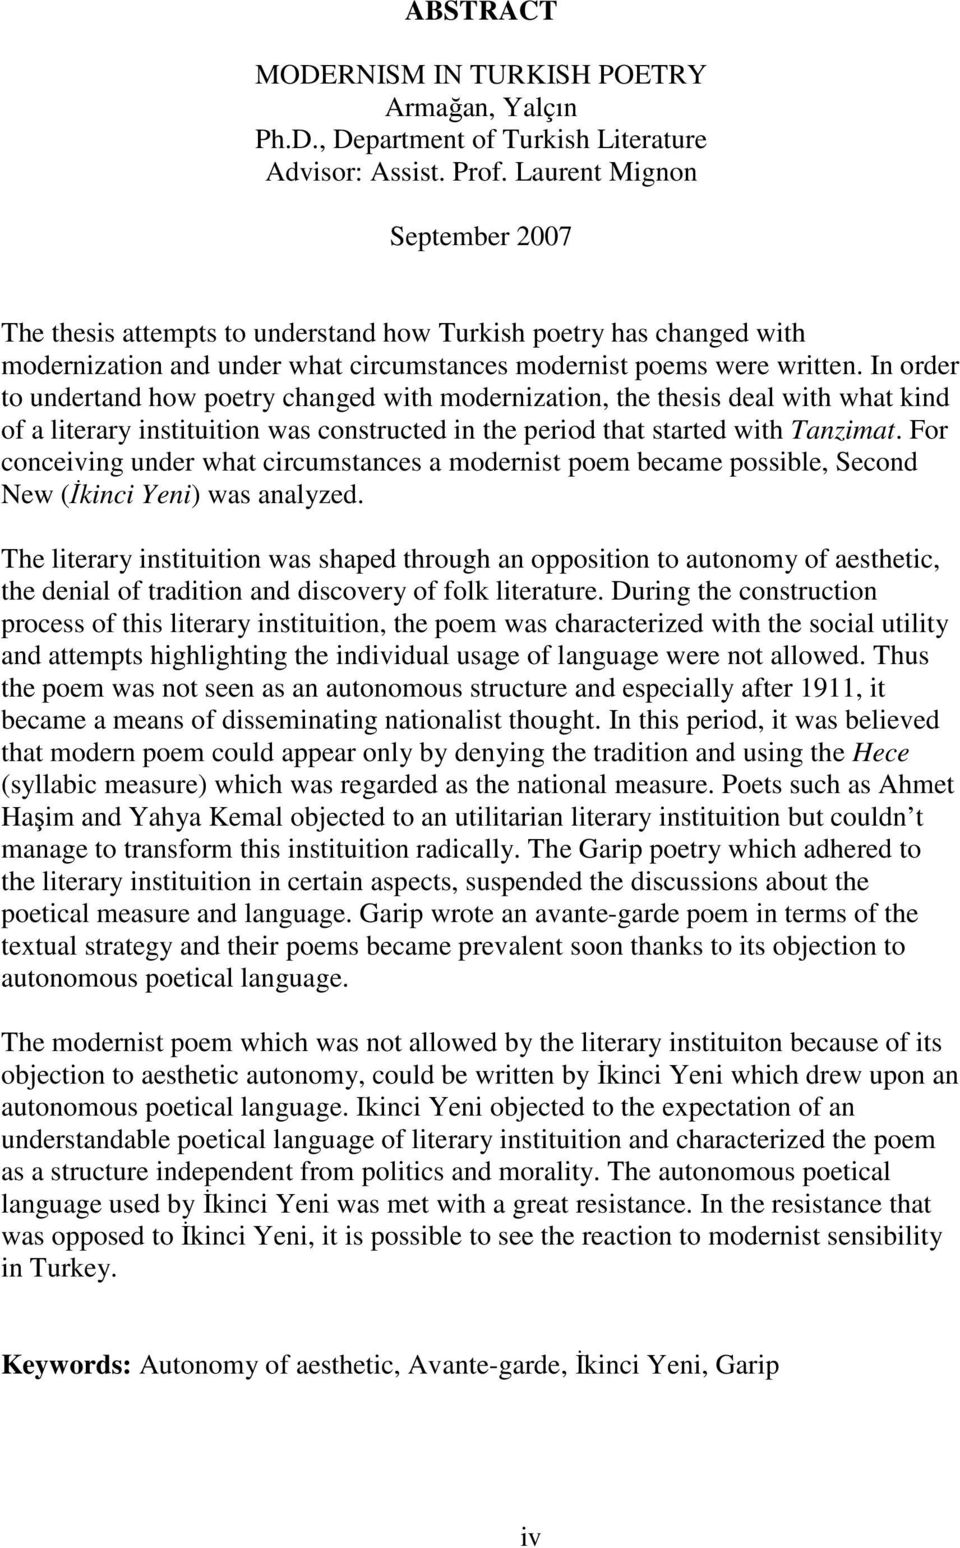 In order to undertand how poetry changed with modernization, the thesis deal with what kind of a literary instituition was constructed in the period that started with Tanzimat.